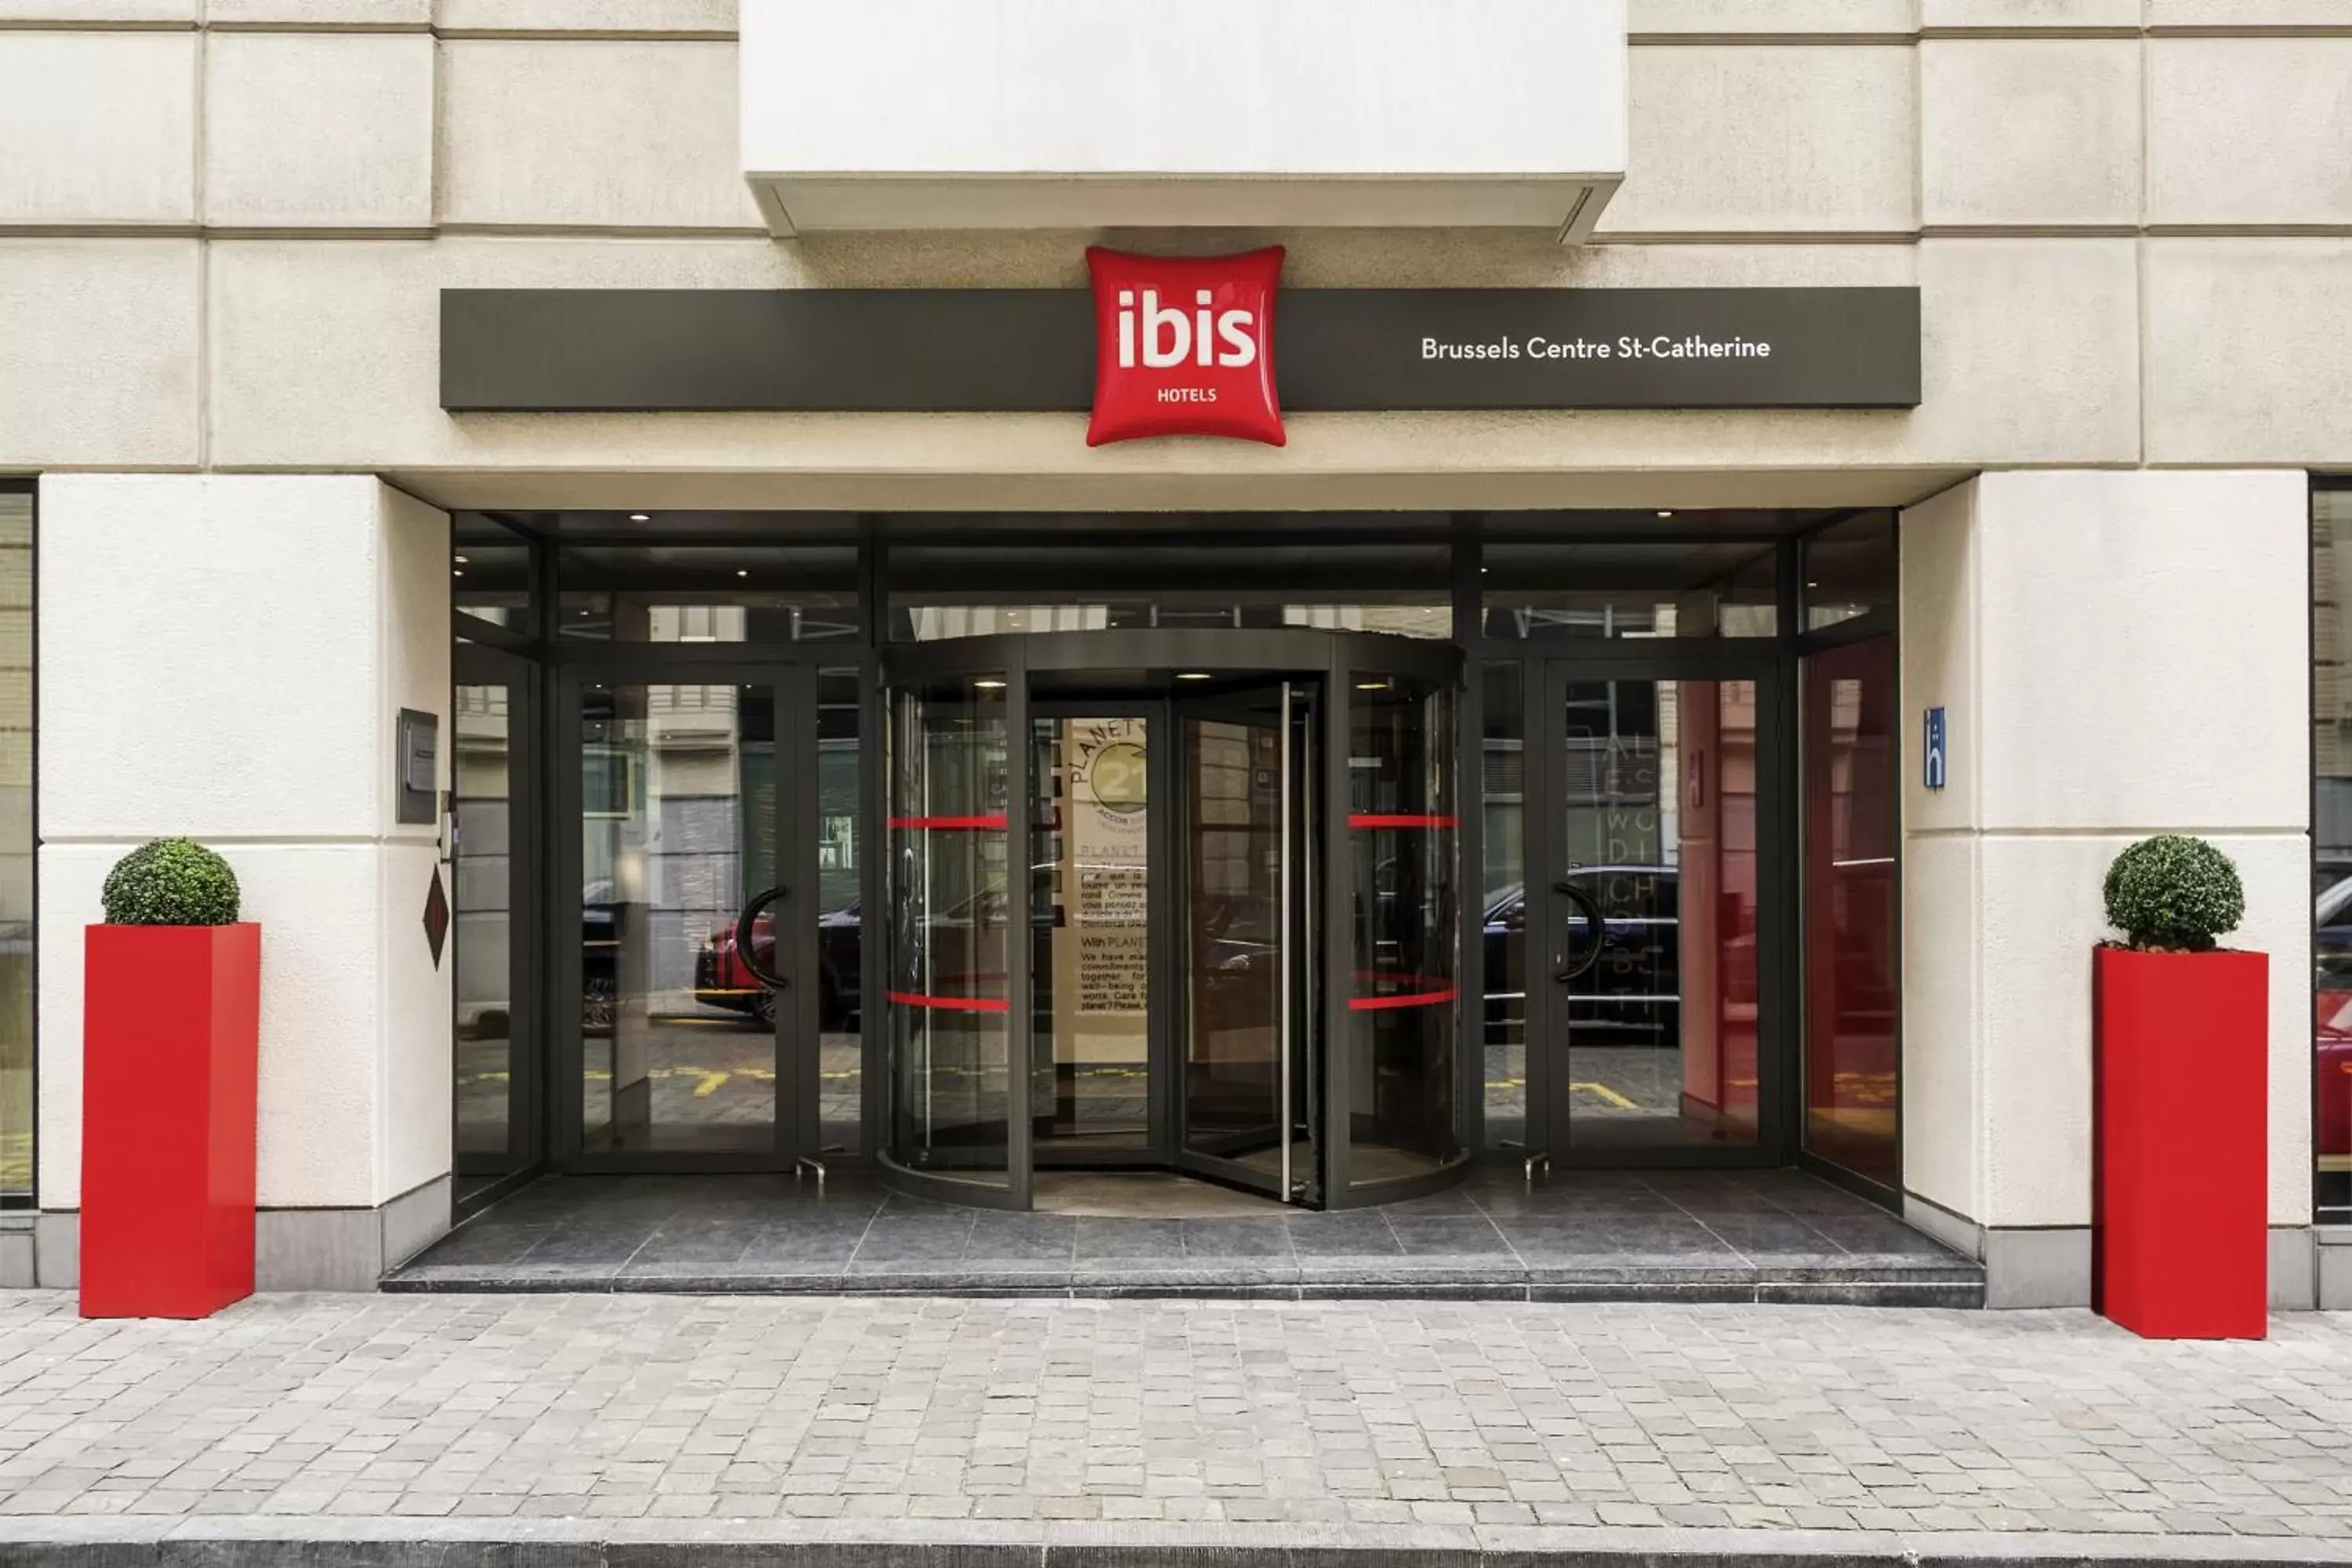 Facade/entrance in Ibis Brussels City Centre